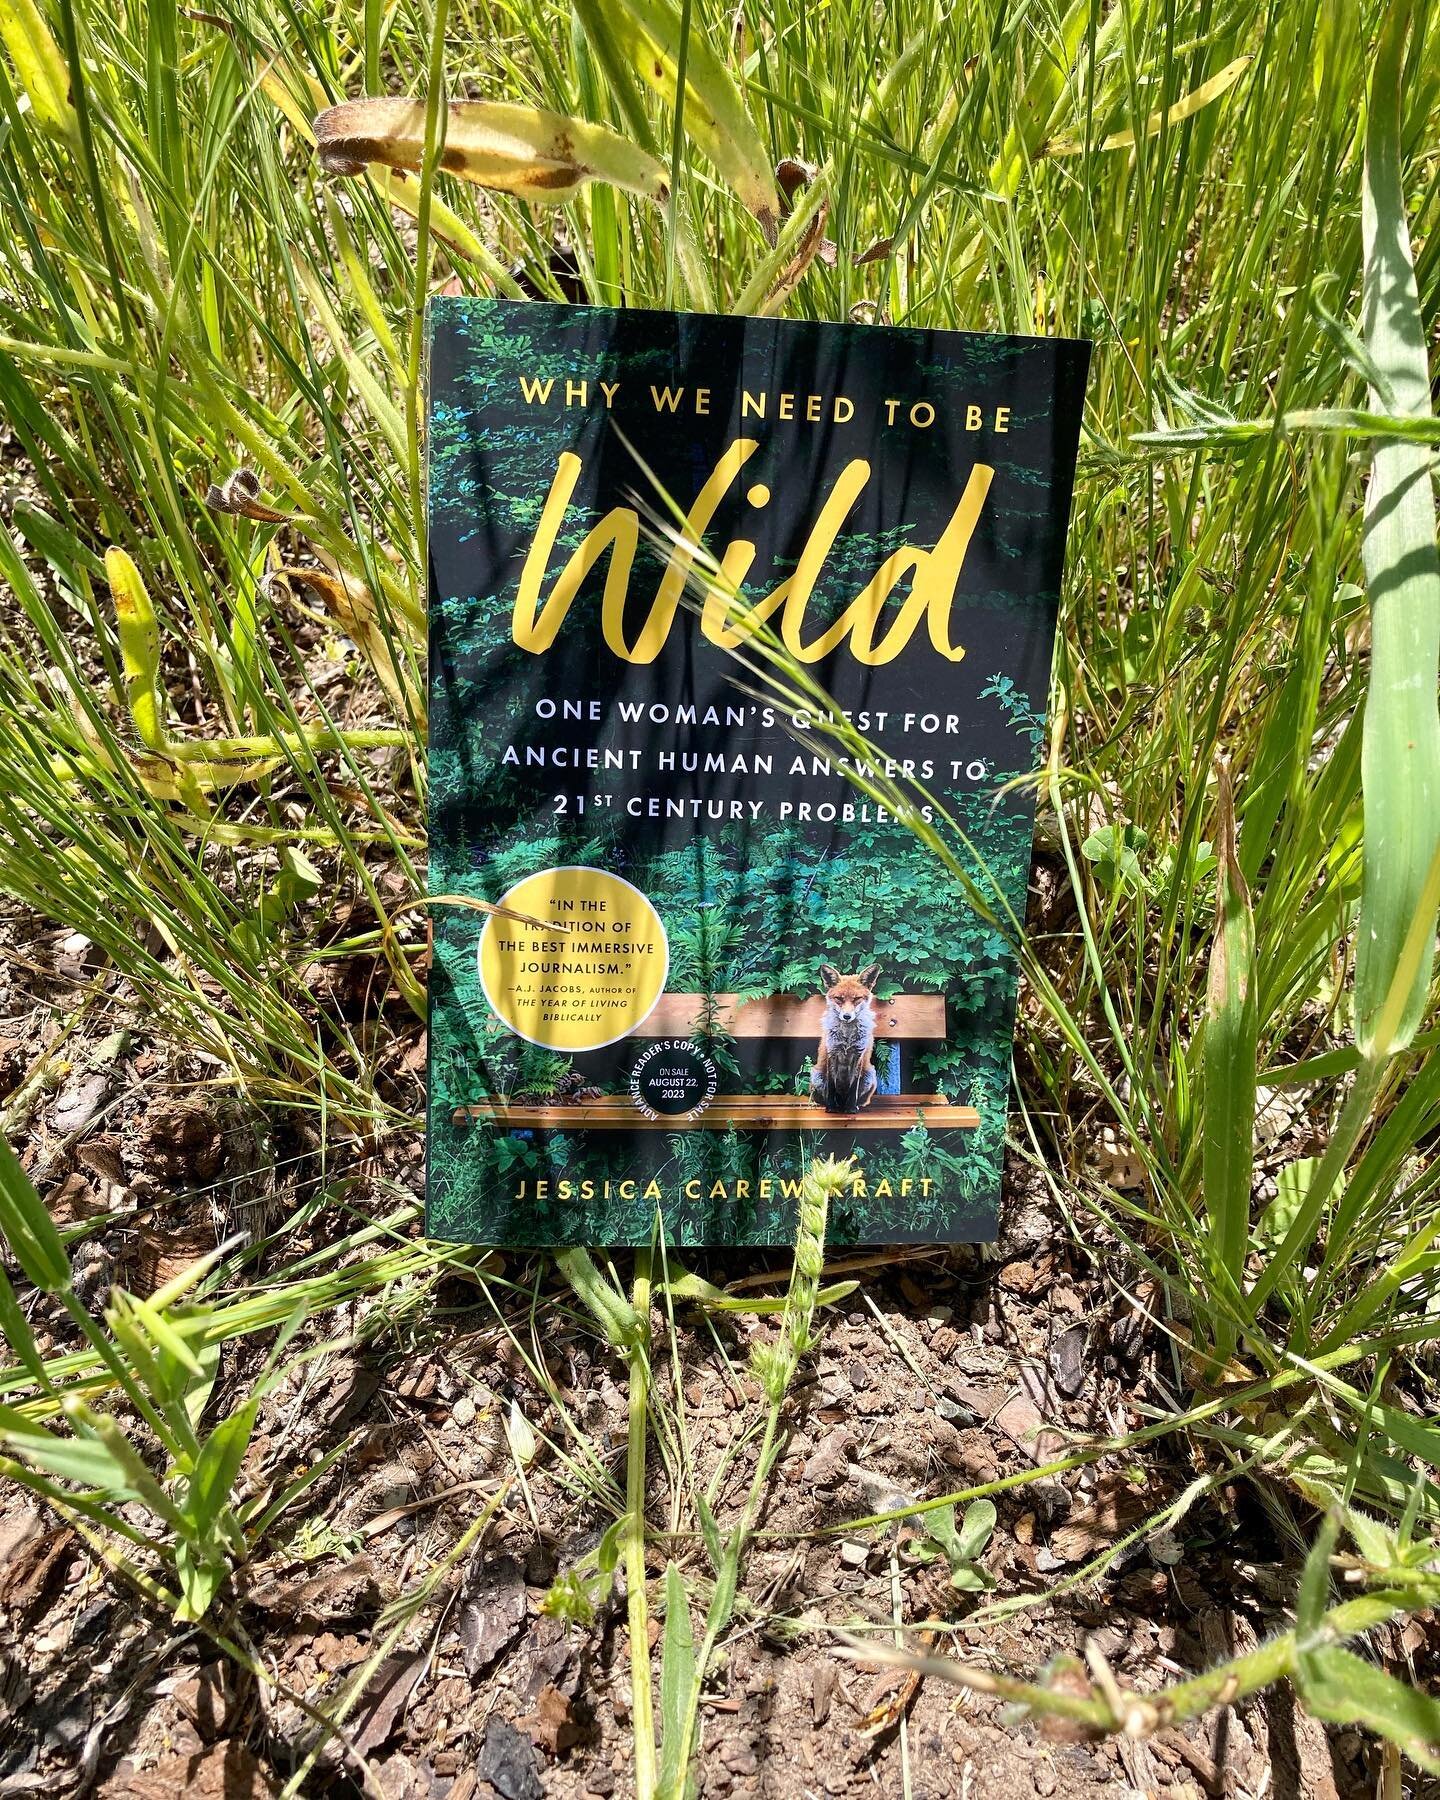 This book showed up amidst the weeds! Advanced review copies now available- contact me if you want to preview it for your mega-influencer rewilder bushcraft audience!